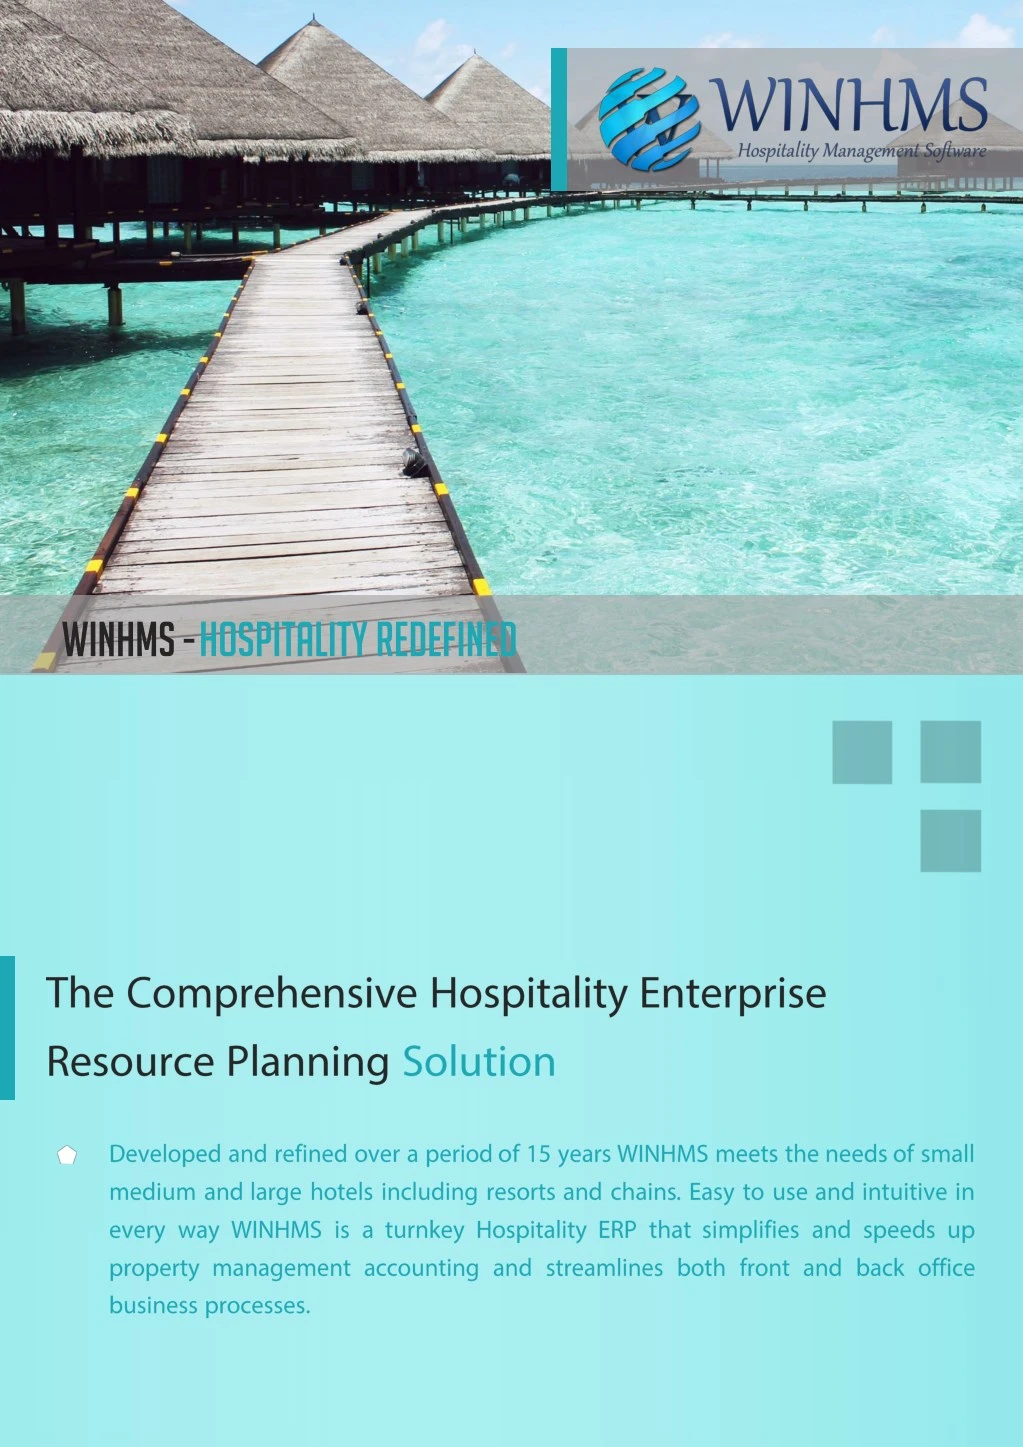 winhms hospitality redefined n.